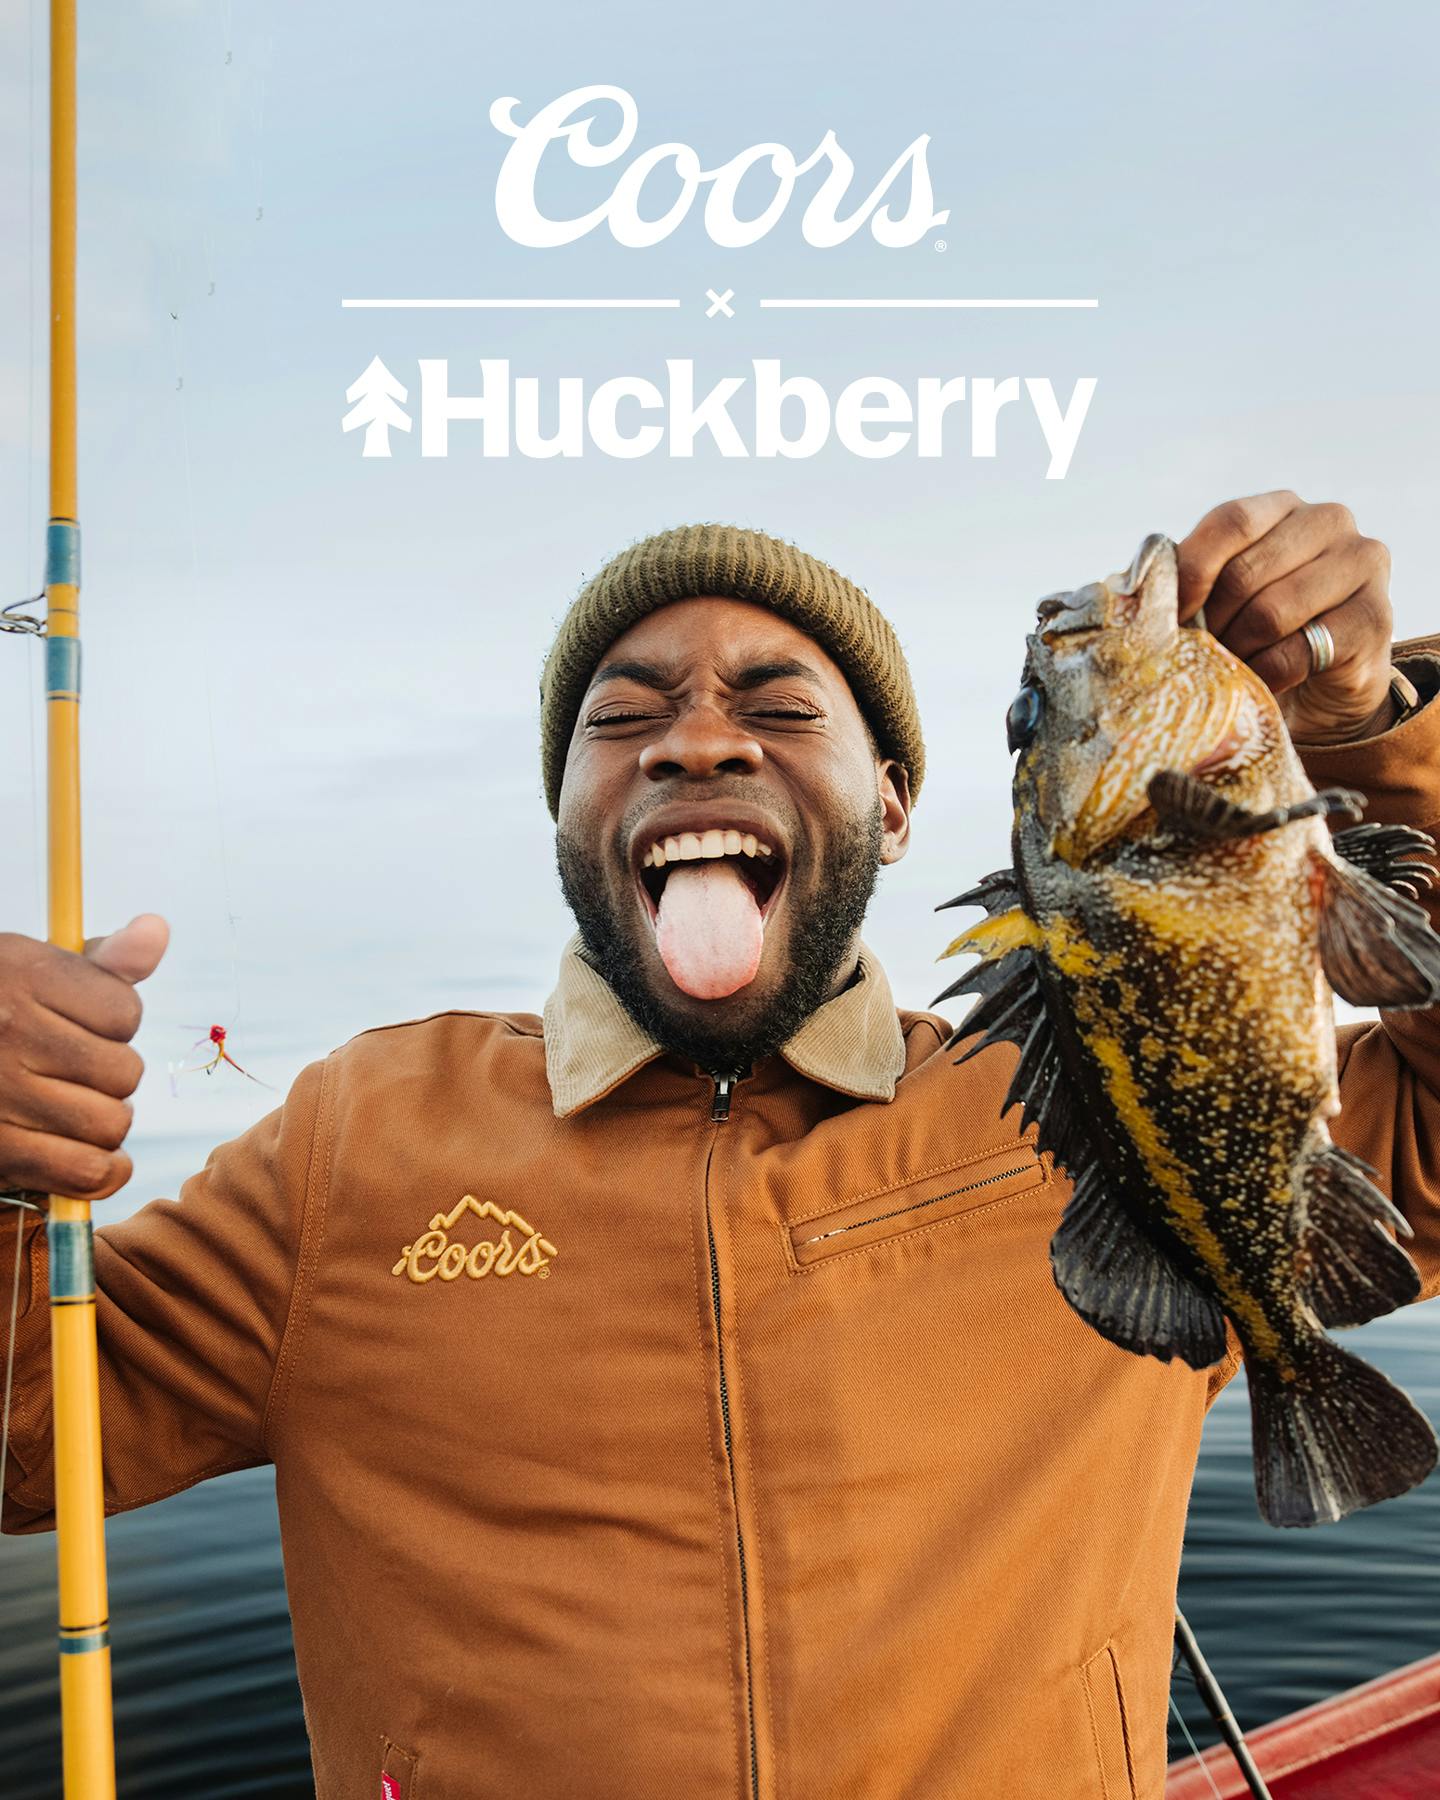 Coors x Huckberry lockup and man holding fish